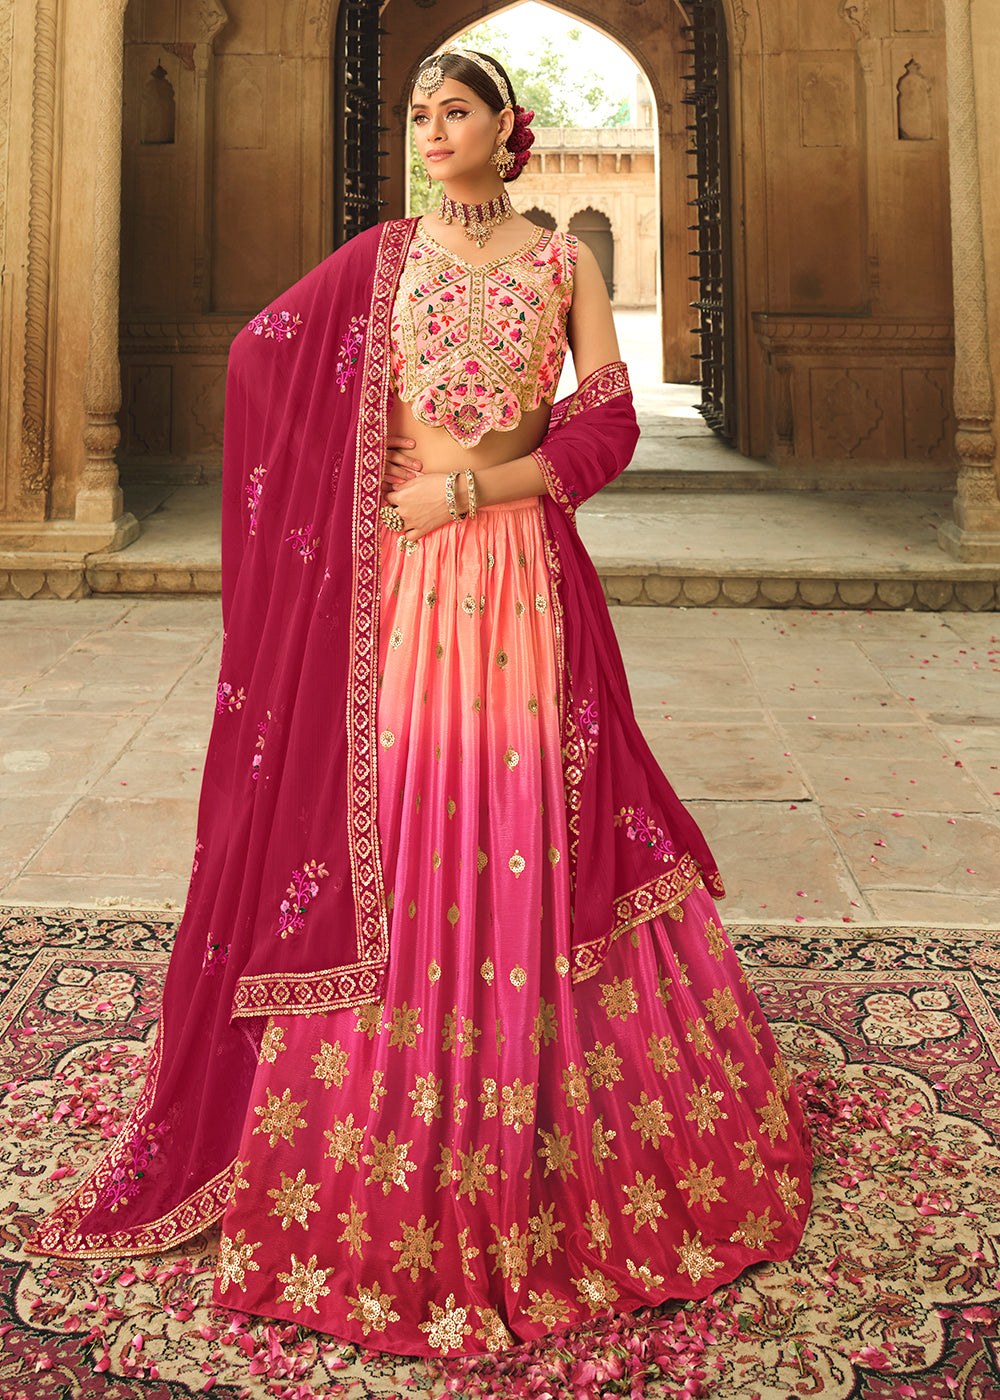 Buy Now Peach to Pink Multi Color Sequins Festive Lehenga Choli Online in USA, UK, Canada & Worldwide at Empress Clothing.